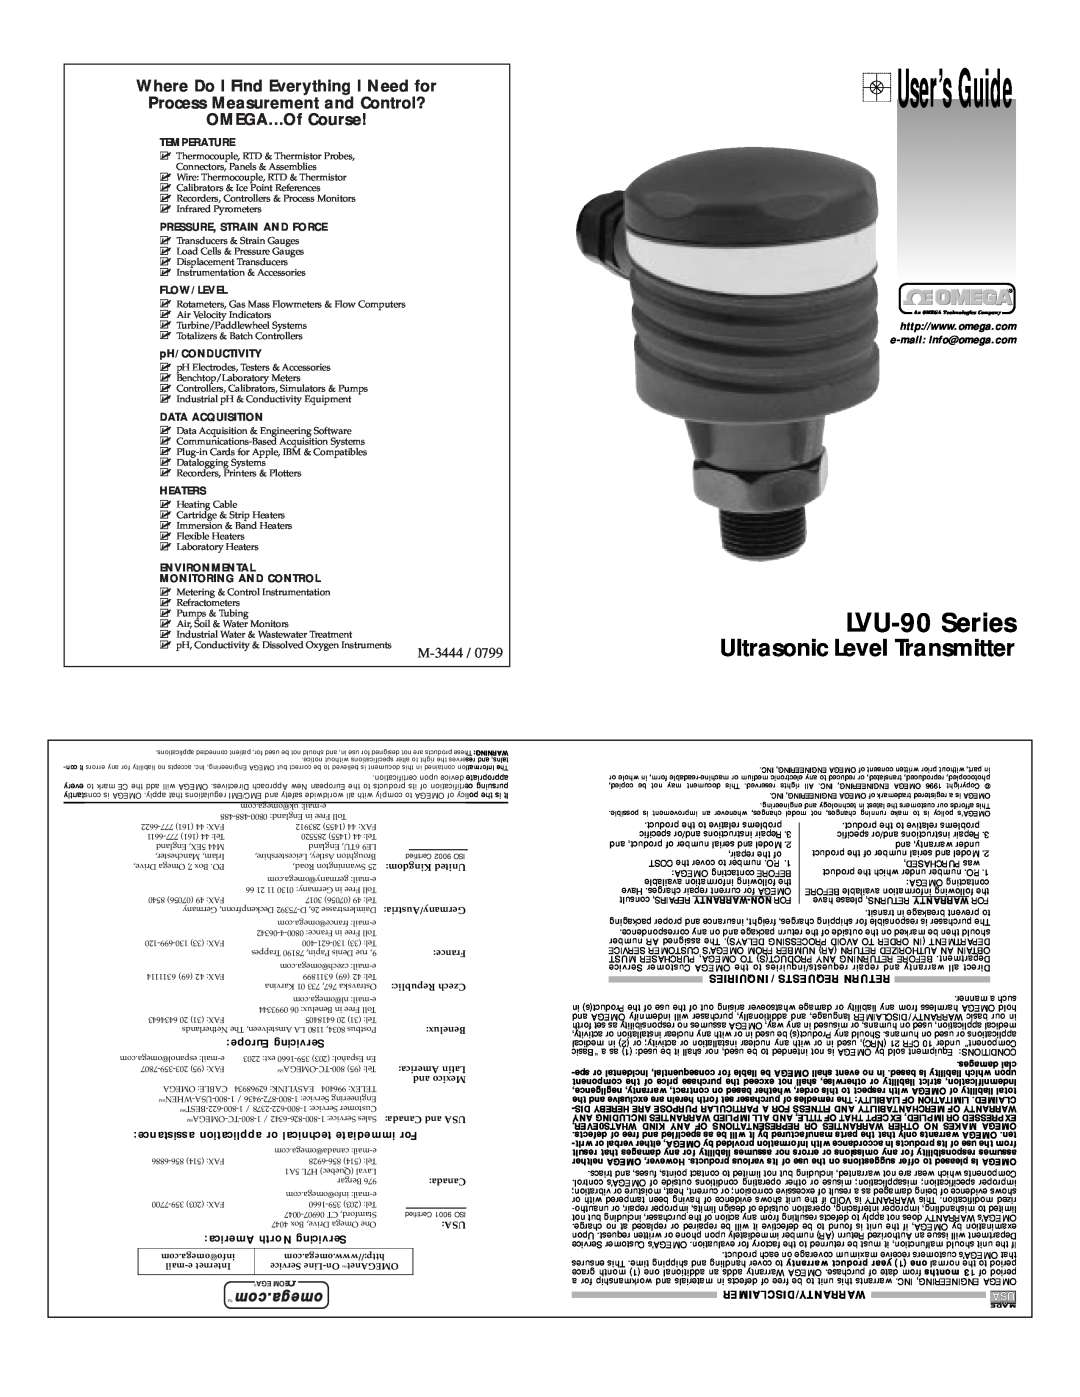 Omega Engineering warranty User’s Guide, LVU-90Series, Ultrasonic Level Transmitter, OMEGA…Of Course, M-3444 /0799 